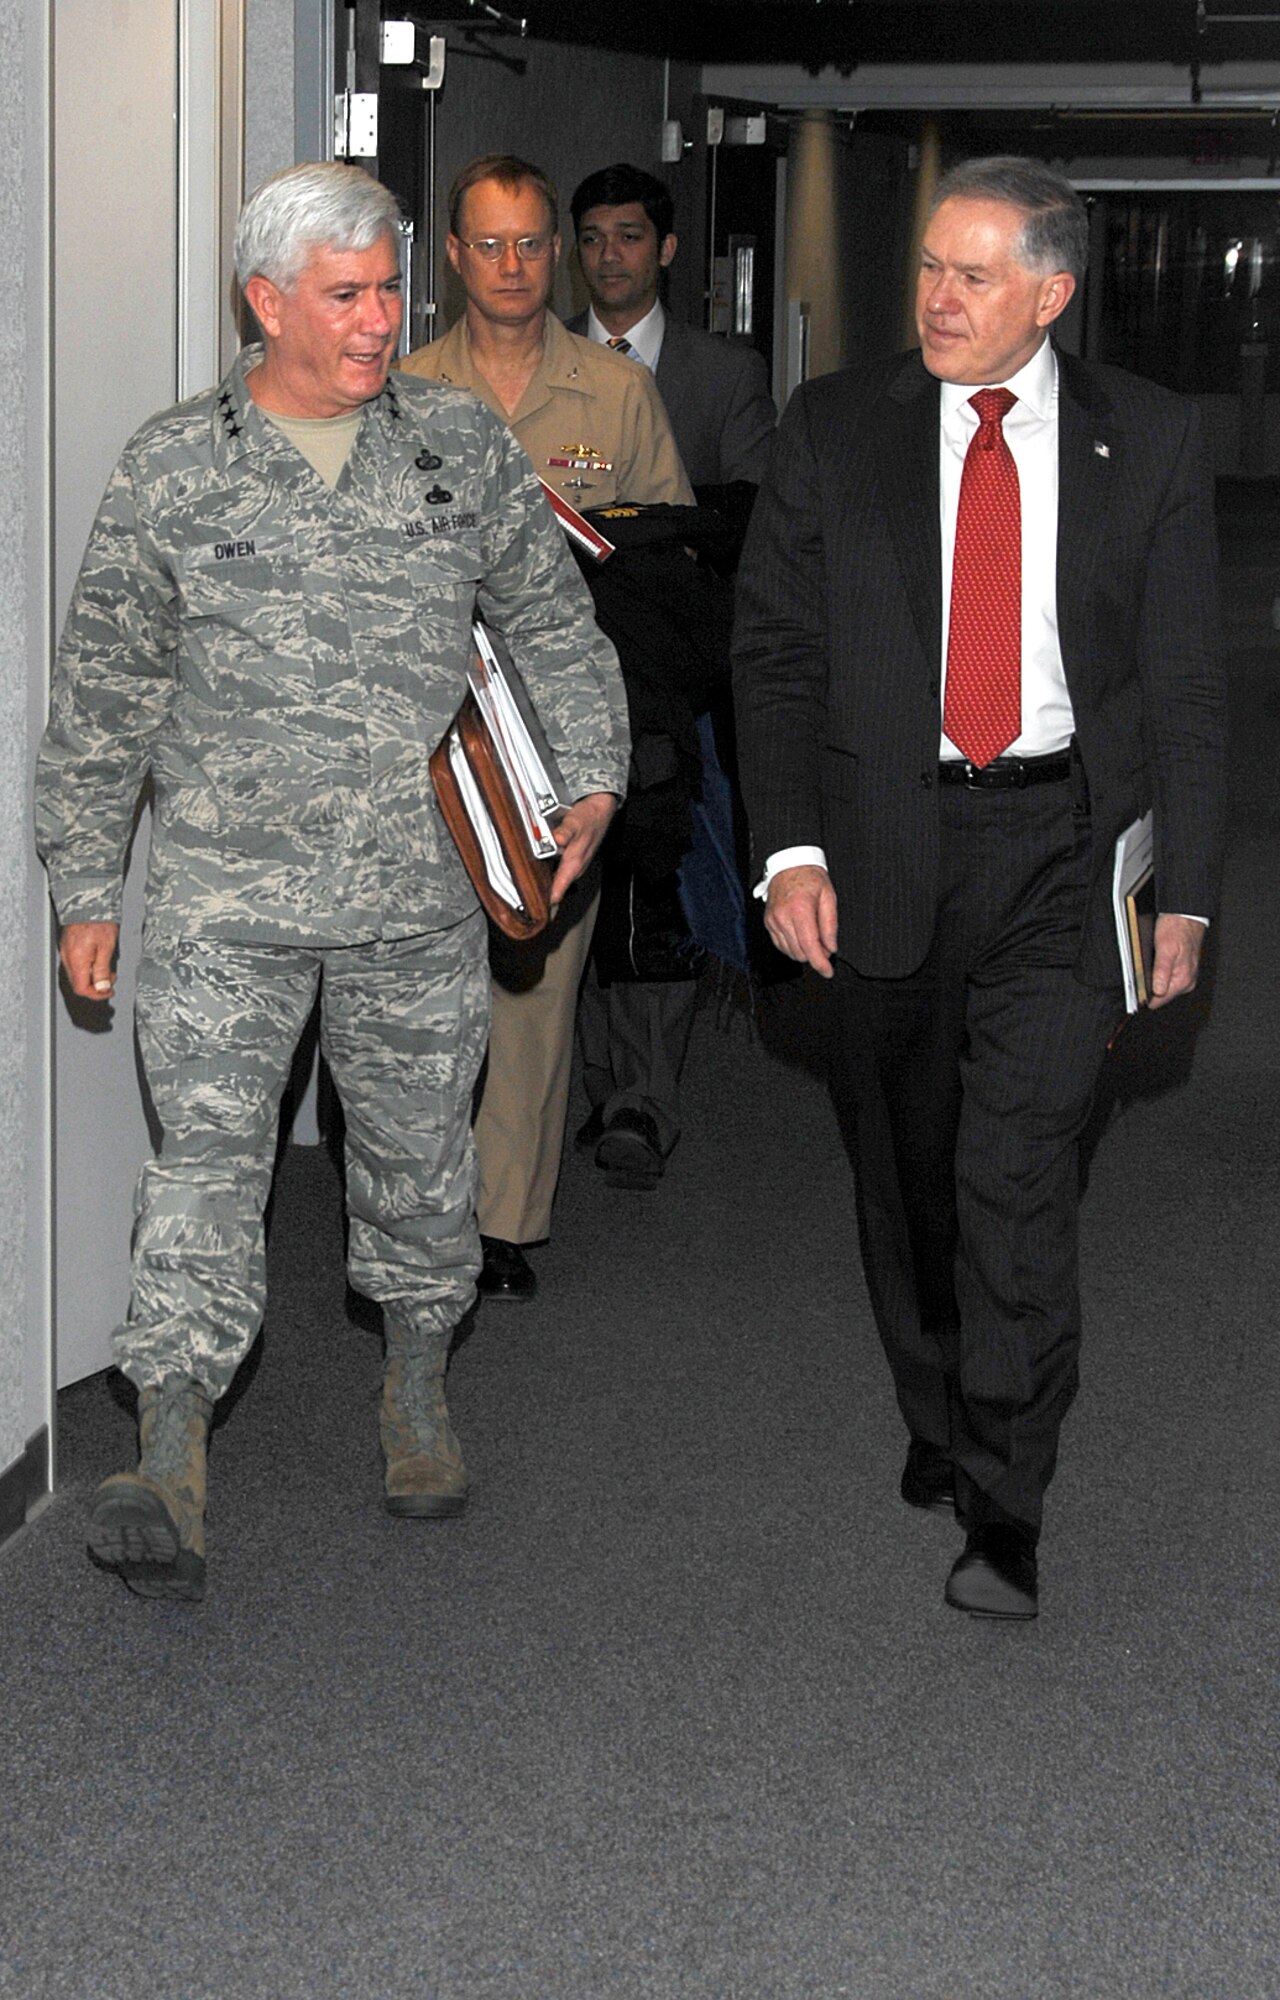 Lt. Gen. Tom Owen, Aeronautical Systems Center Commander, escorts Frank Kendall, Principal Deputy Under Secretary of Defense for Acquisition, Technology and Logistics, to a meeting with Air Force Program Executive Officers and ASC senior leaders.  Mr. Kendall was here to brief on a series of initiatives to increase efficiency in the acquisition system.     